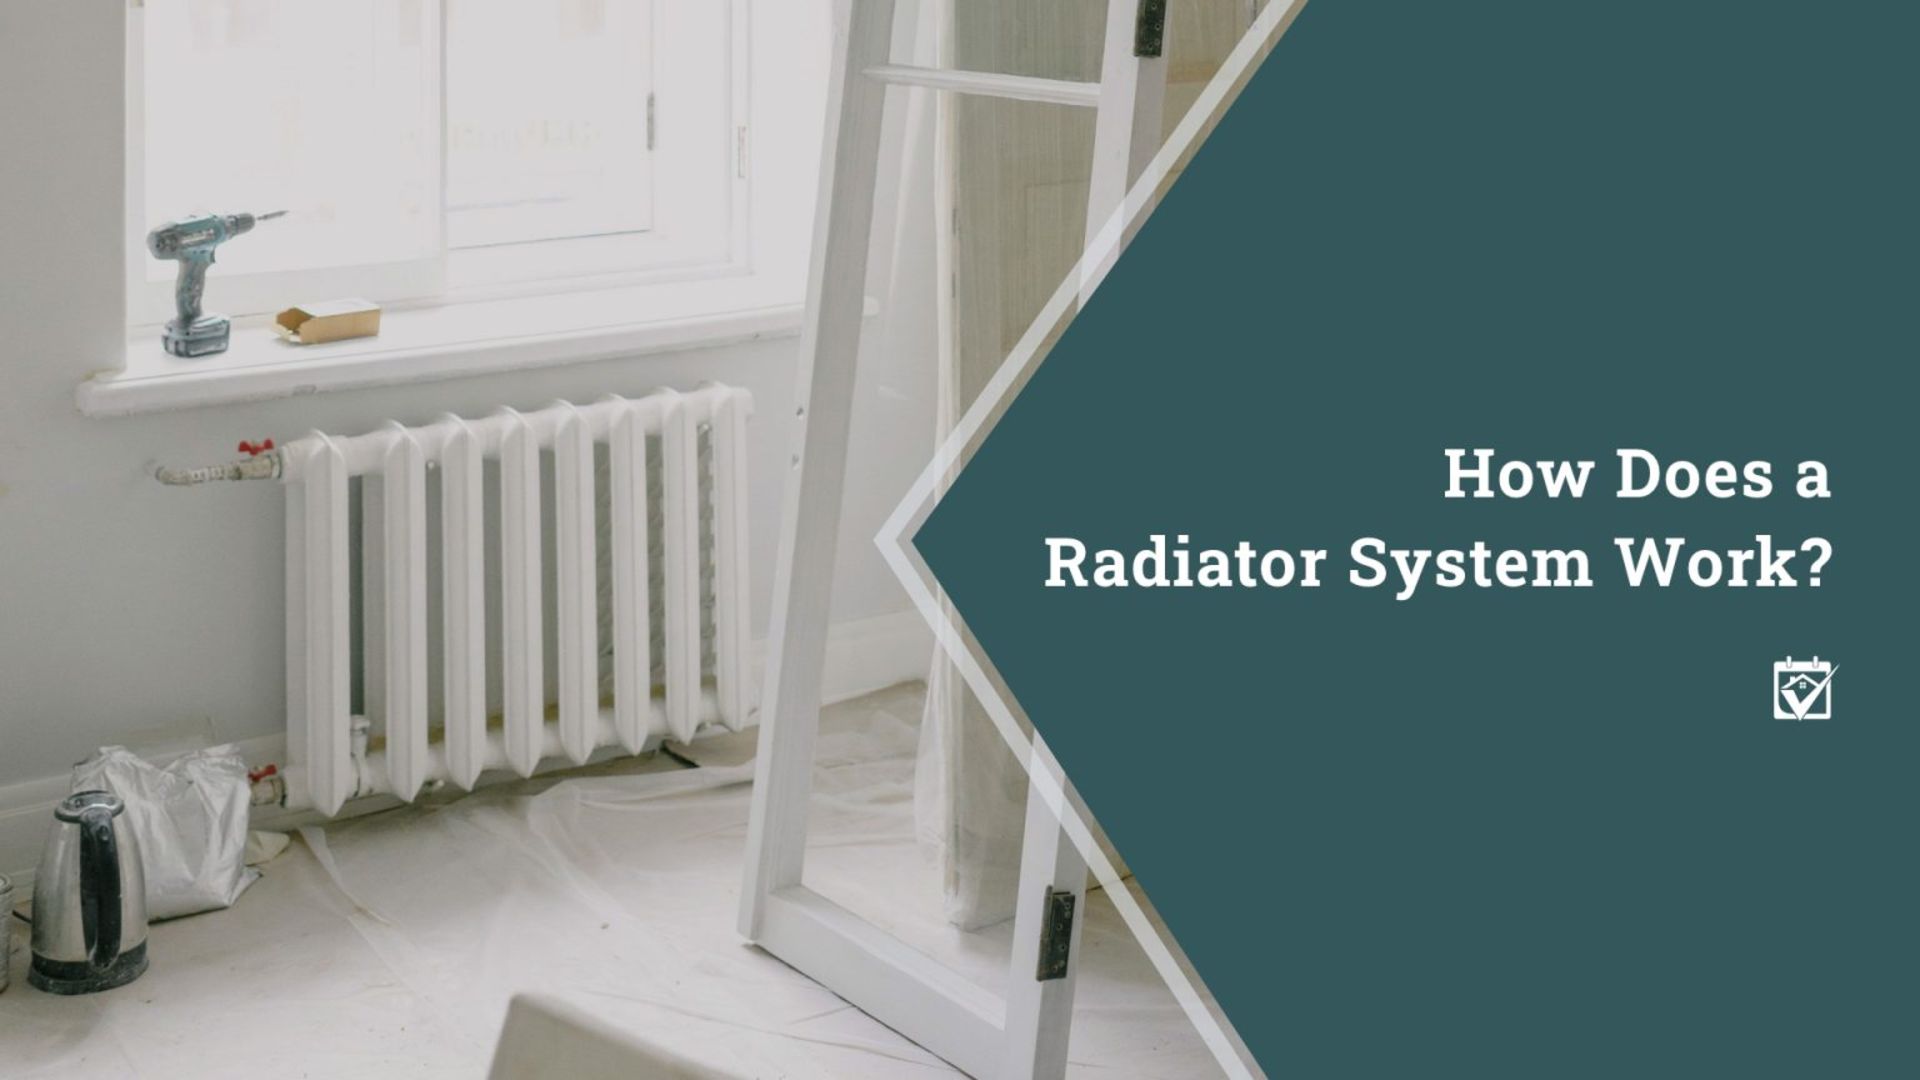 How Does a Radiator System Work?